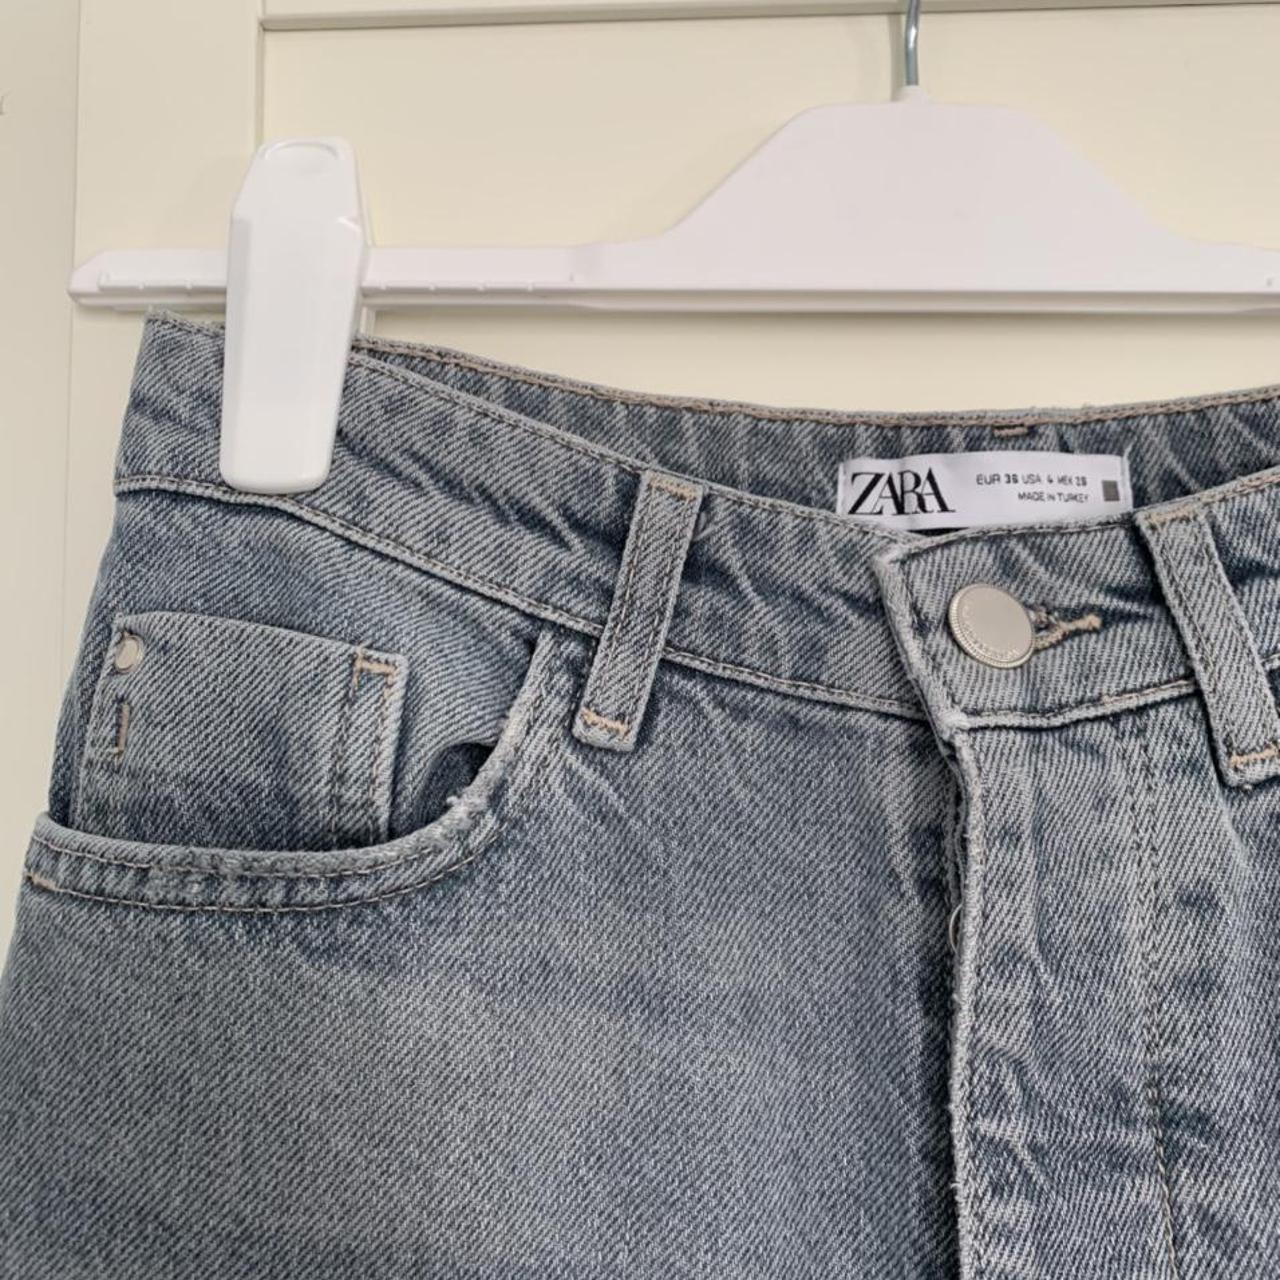 Product Image 3 - Brand new Zara jeans the